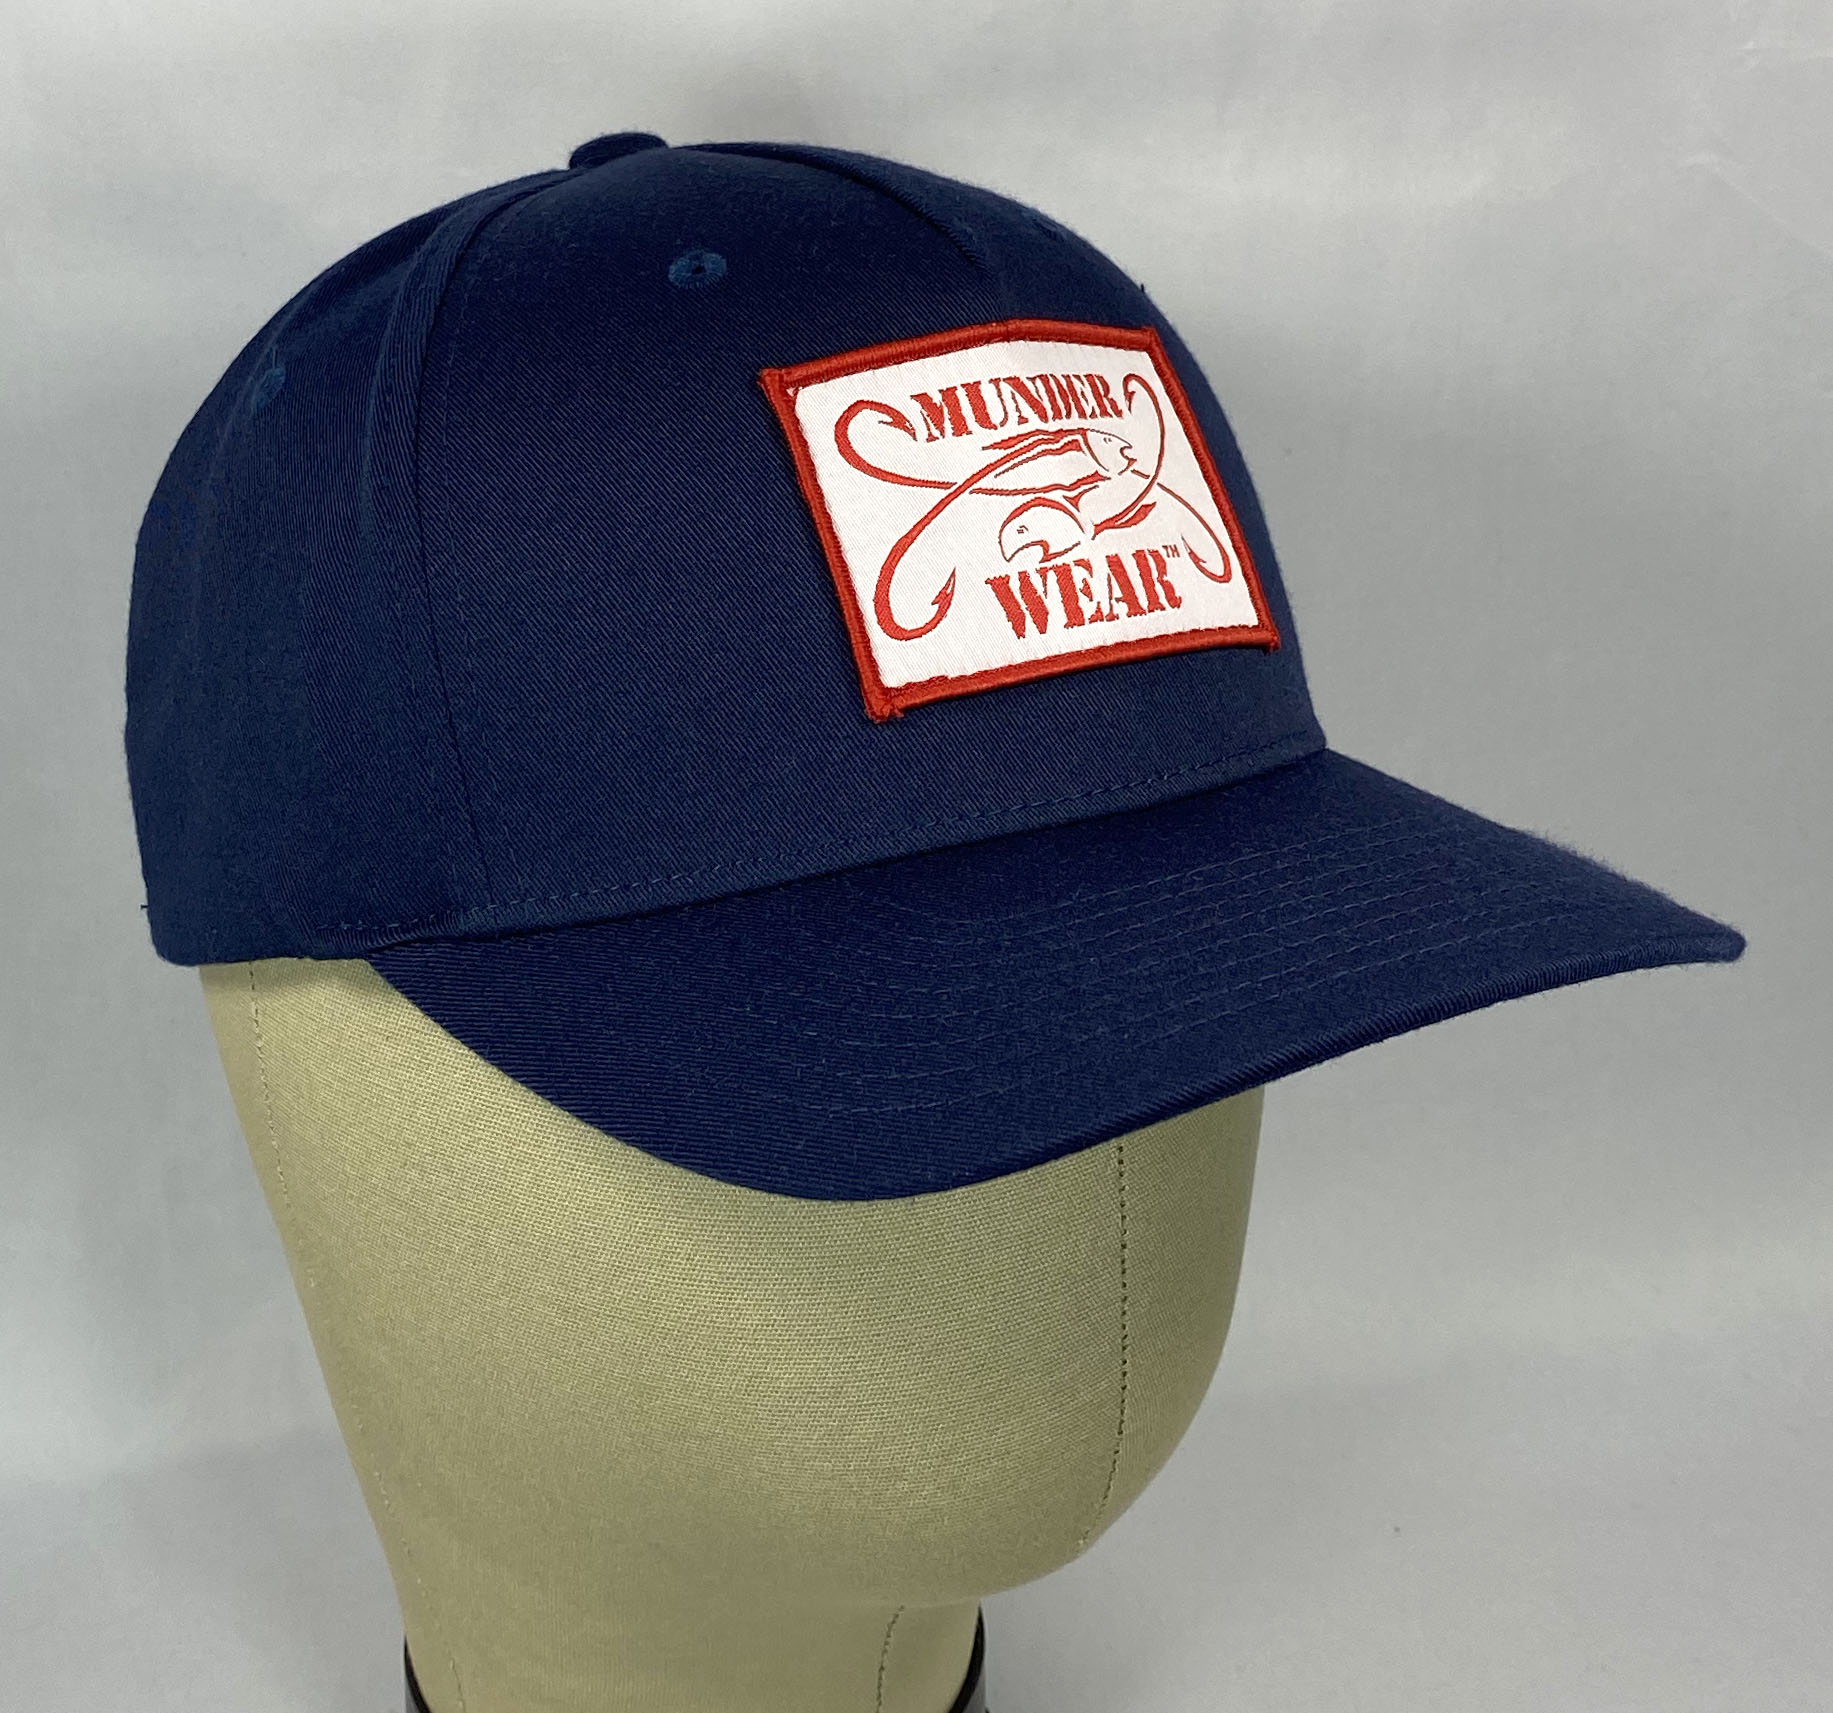 Fitted Fishing Cap - MUNDER WEAR